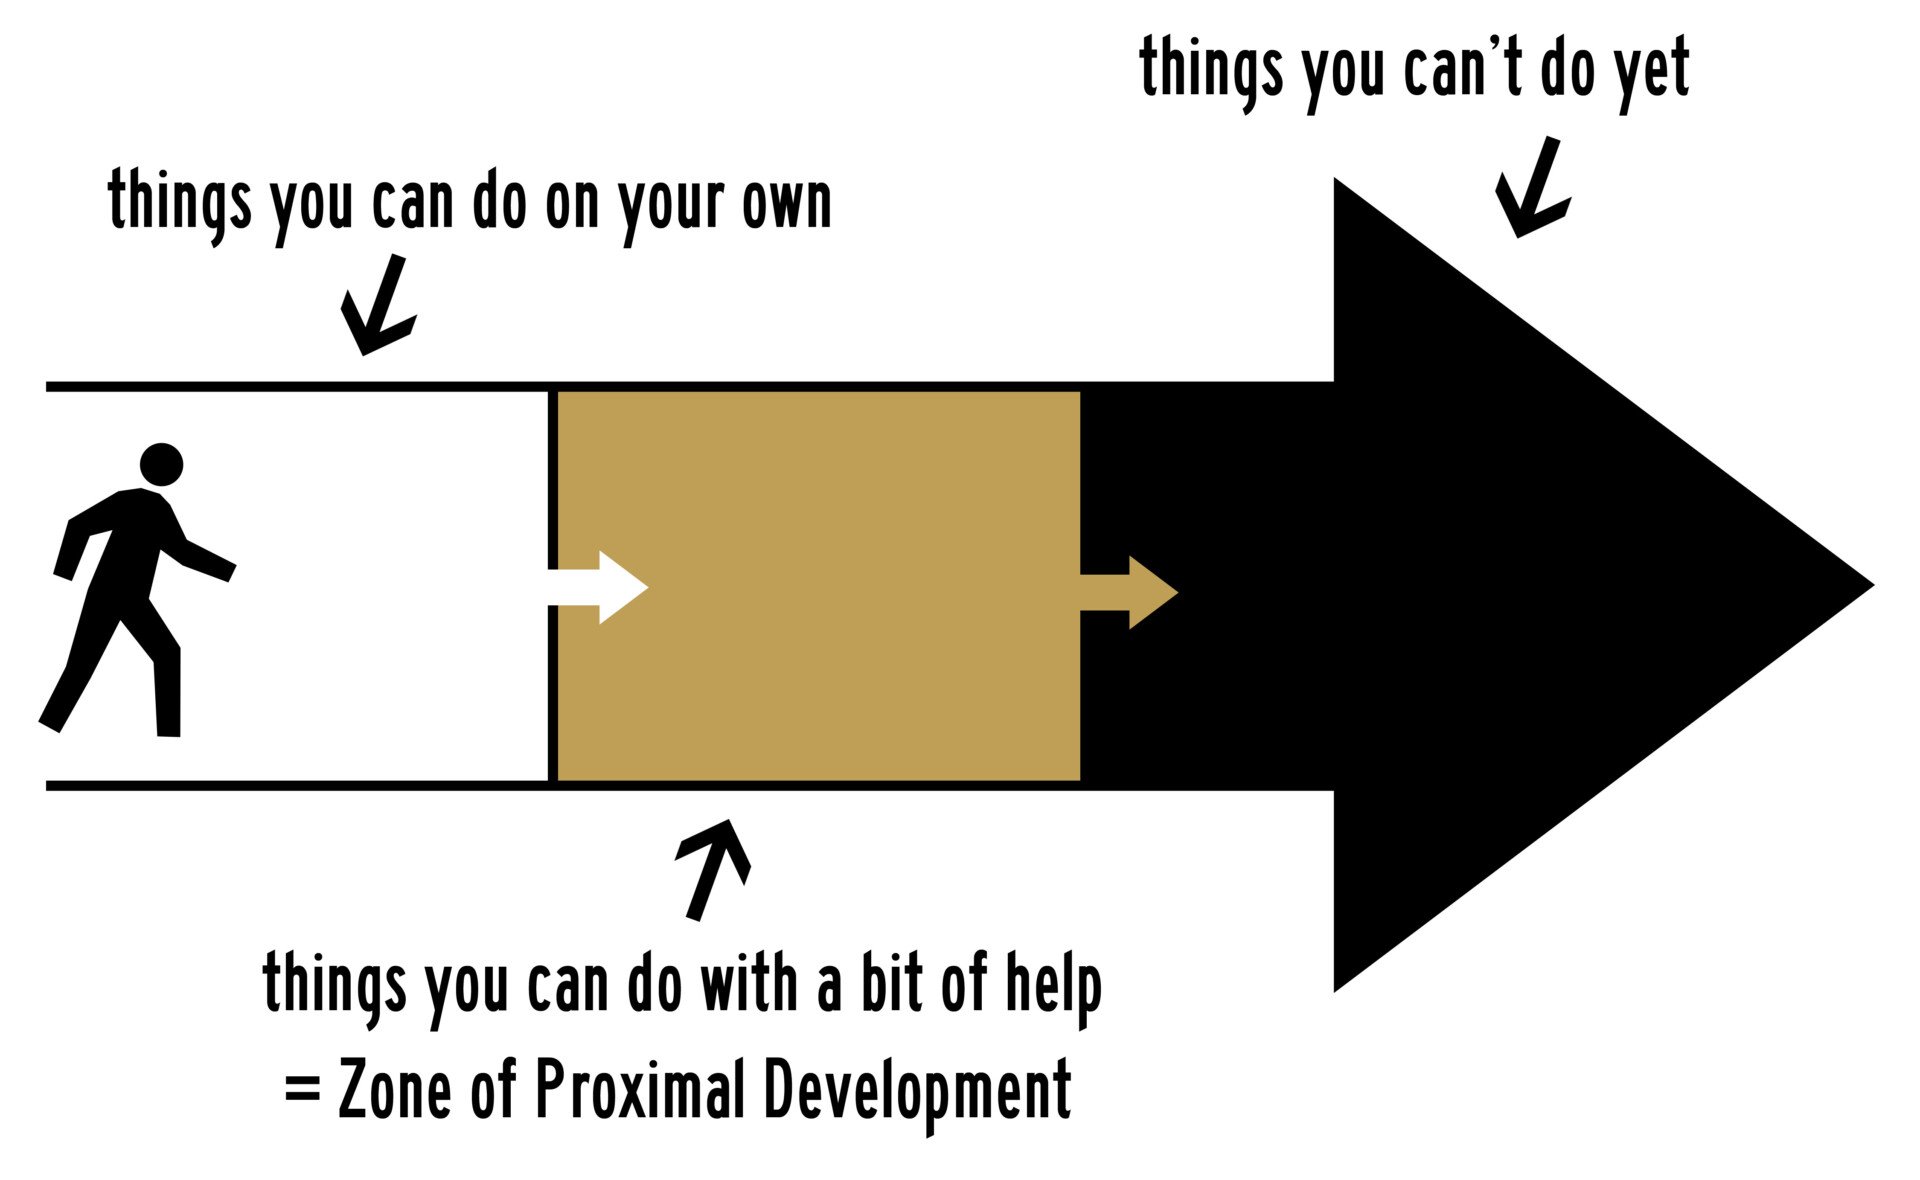 a stick figure making its way down an arrow. it is situated in a part labelled 'things you can do on your own'. the next section of the arrow is labelled 'things you can do with a bit of help = zone of proximal development'. the end of the arrow is labelled 'things you can't do yet.'